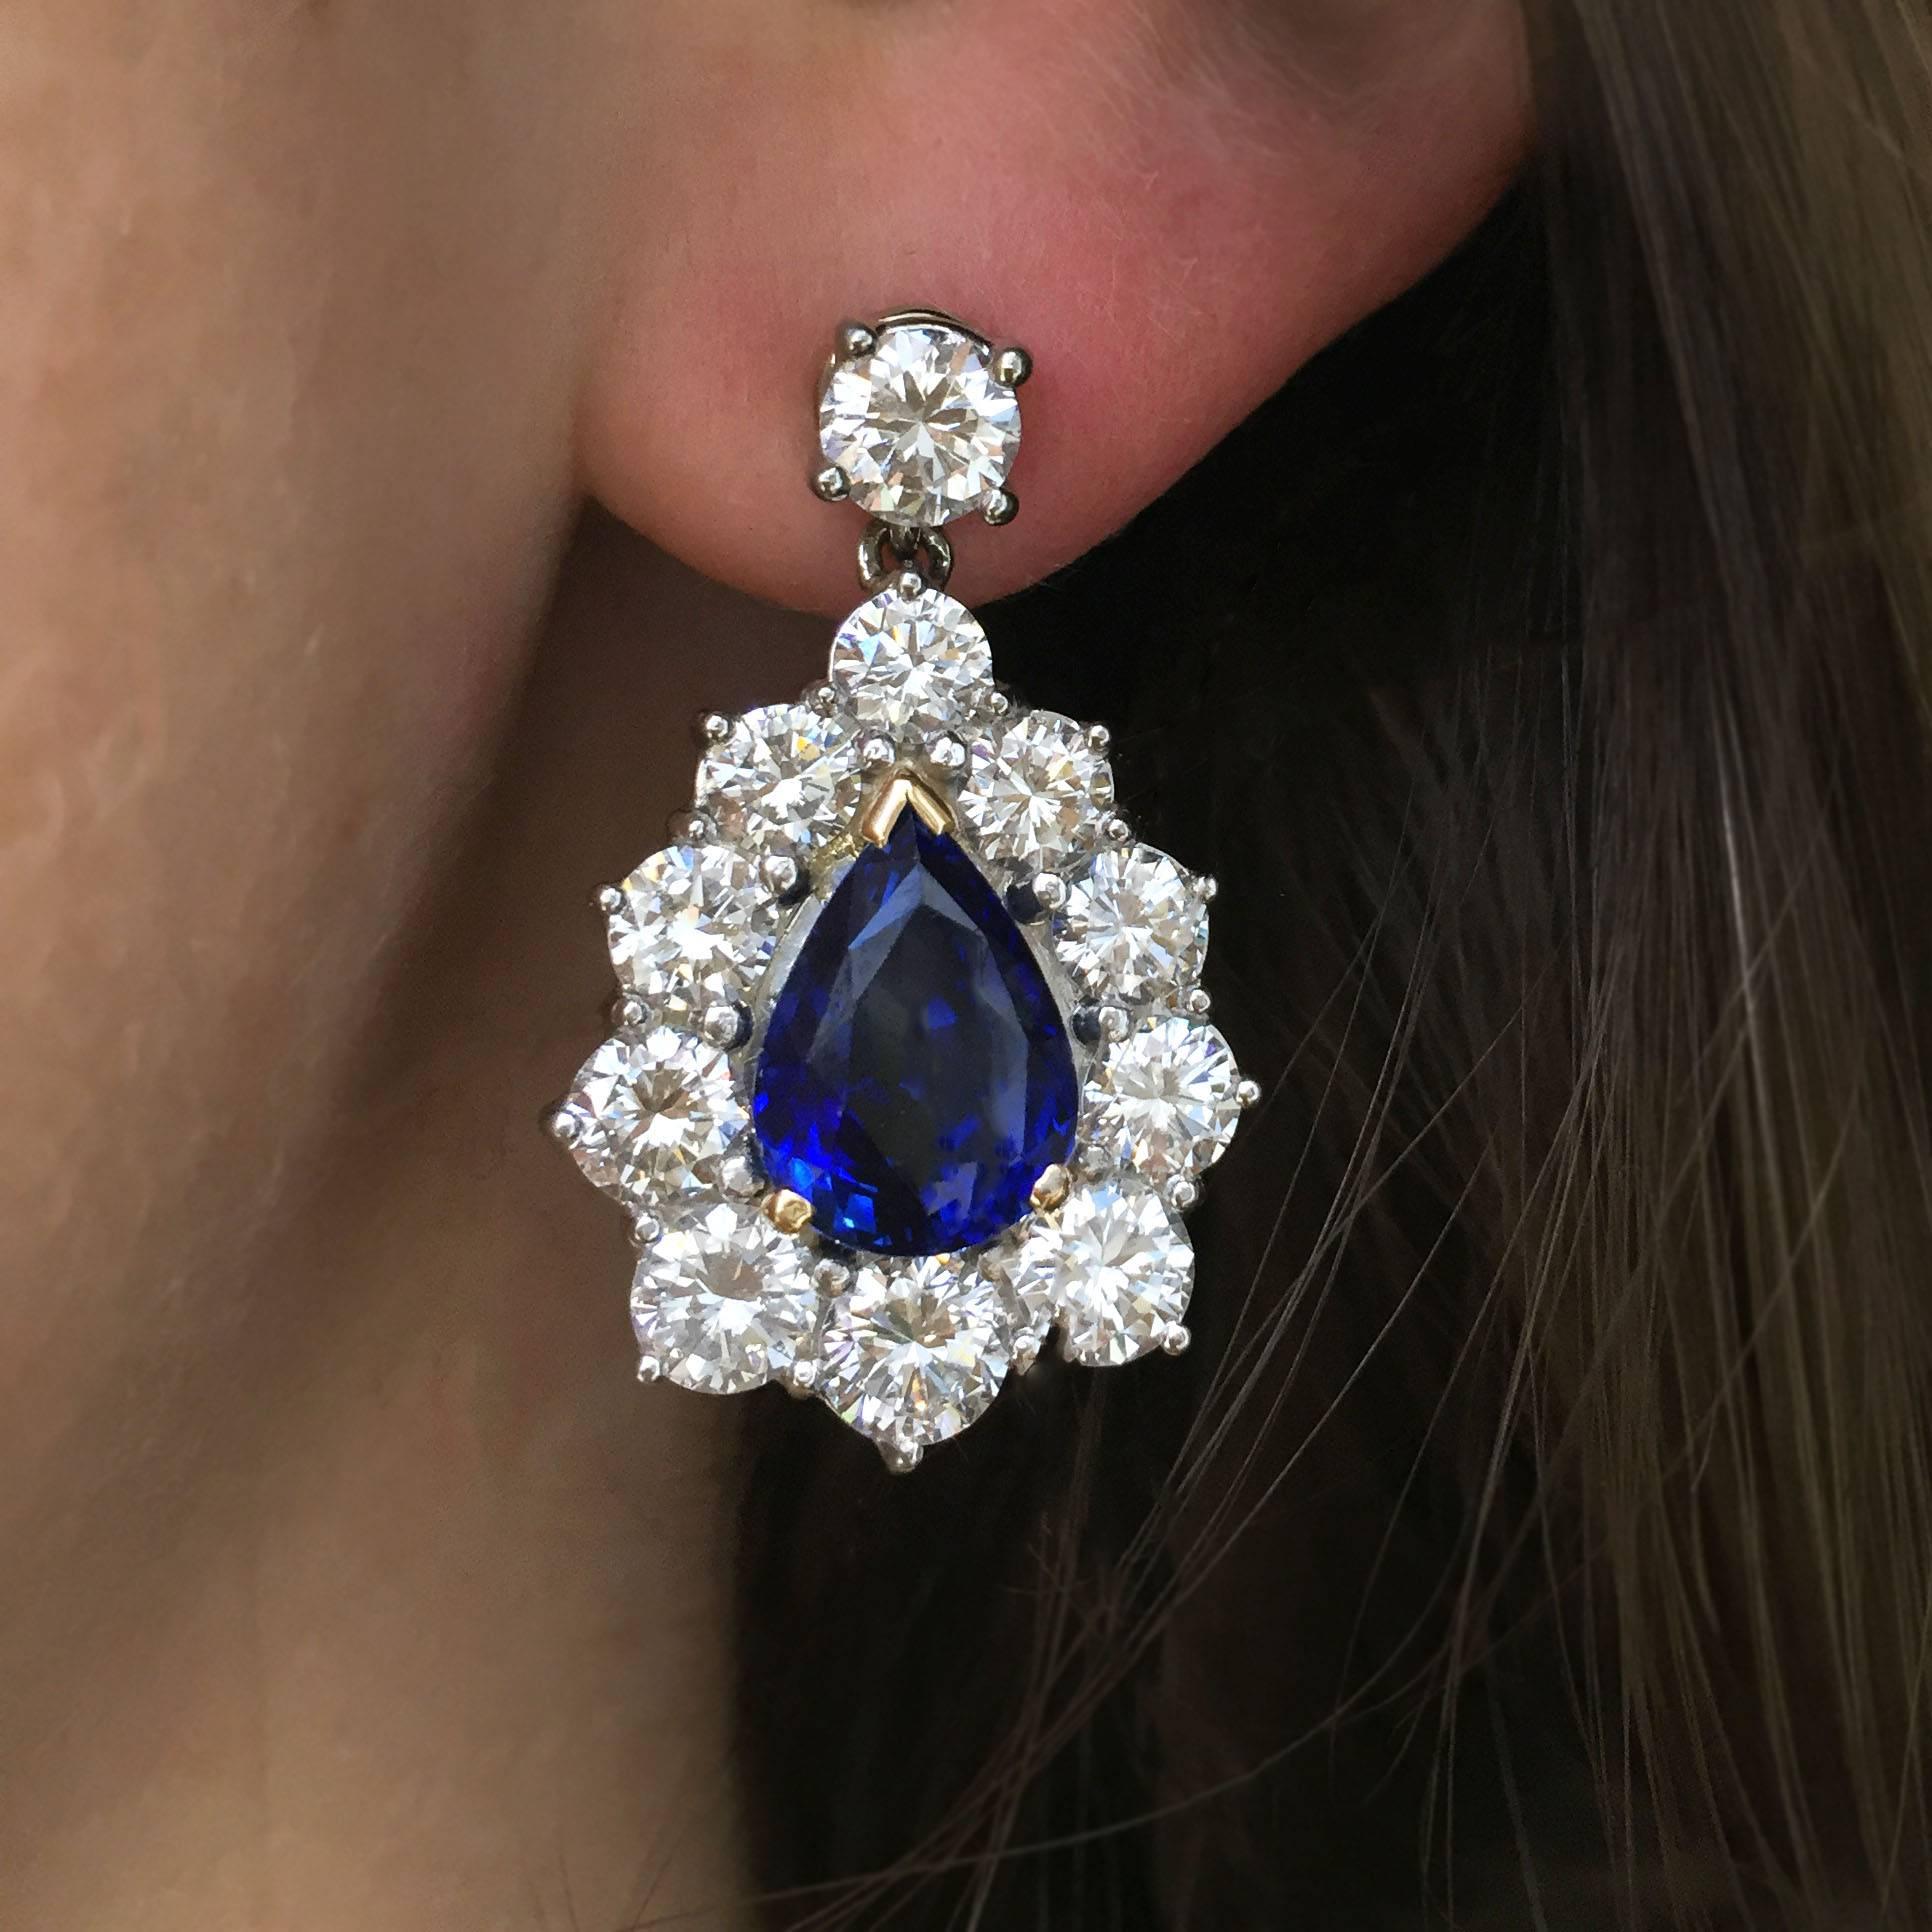 This stunning pair of earrings features two GIA-graded pear-shaped royal blue sapphires, 8.14 carats total, in diamond surrounds, suspended from single round diamonds. Mounted in 18k white and yellow gold, these earrings contain 22 round